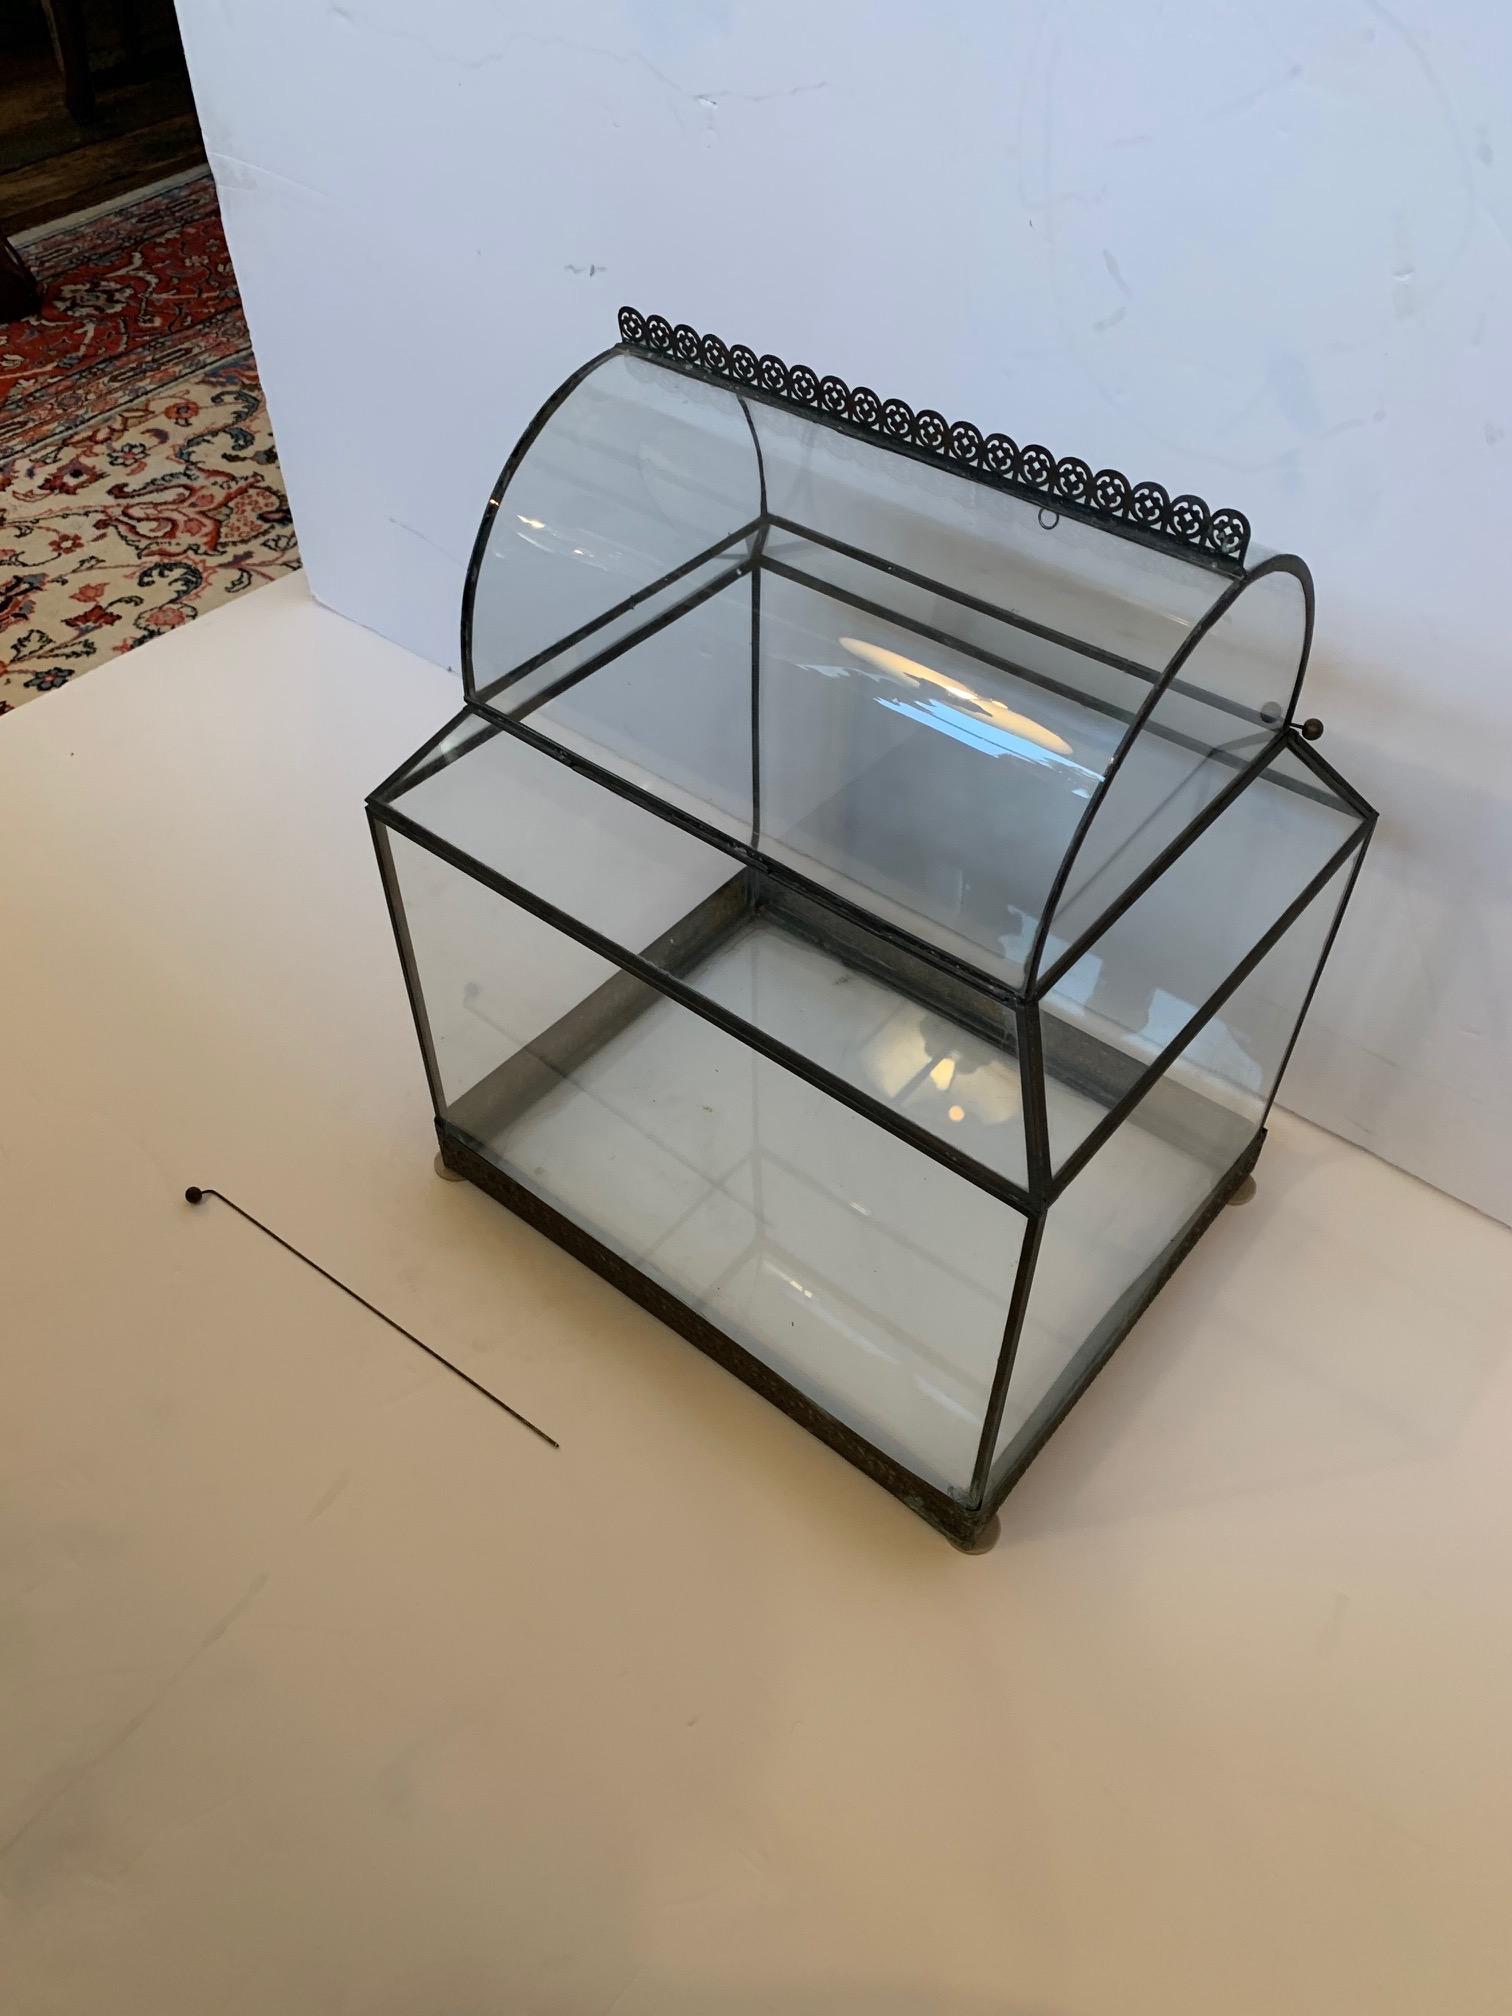 A beautiful vintage glass terrarium with wire work, beautiful for display.